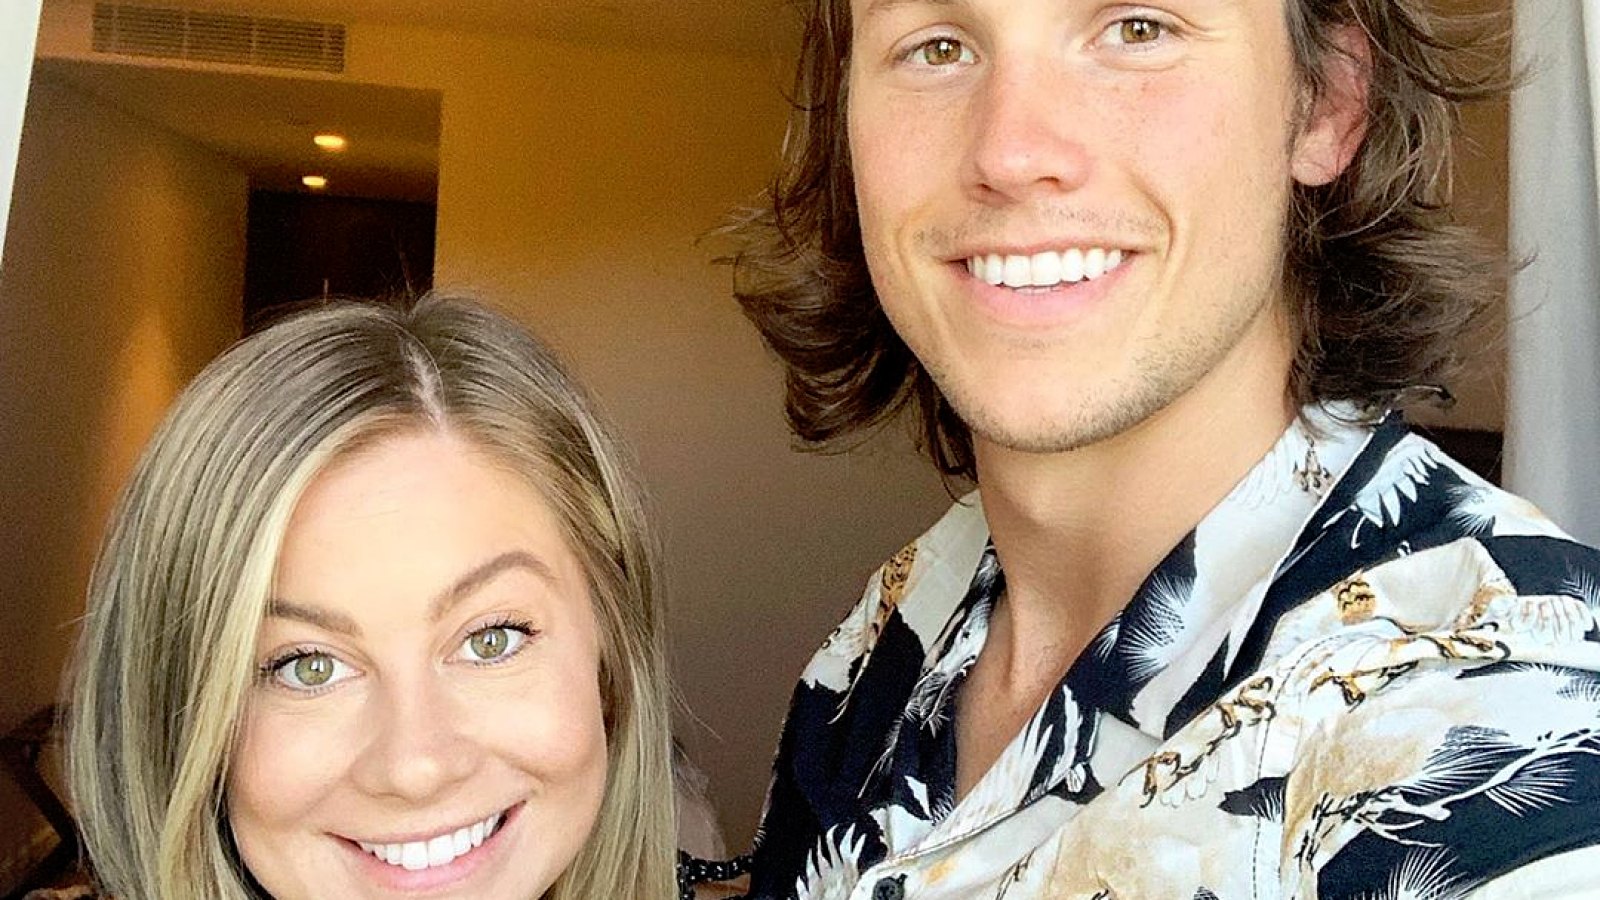 Shawn Johnson East and Andrew East Instagram Selfie